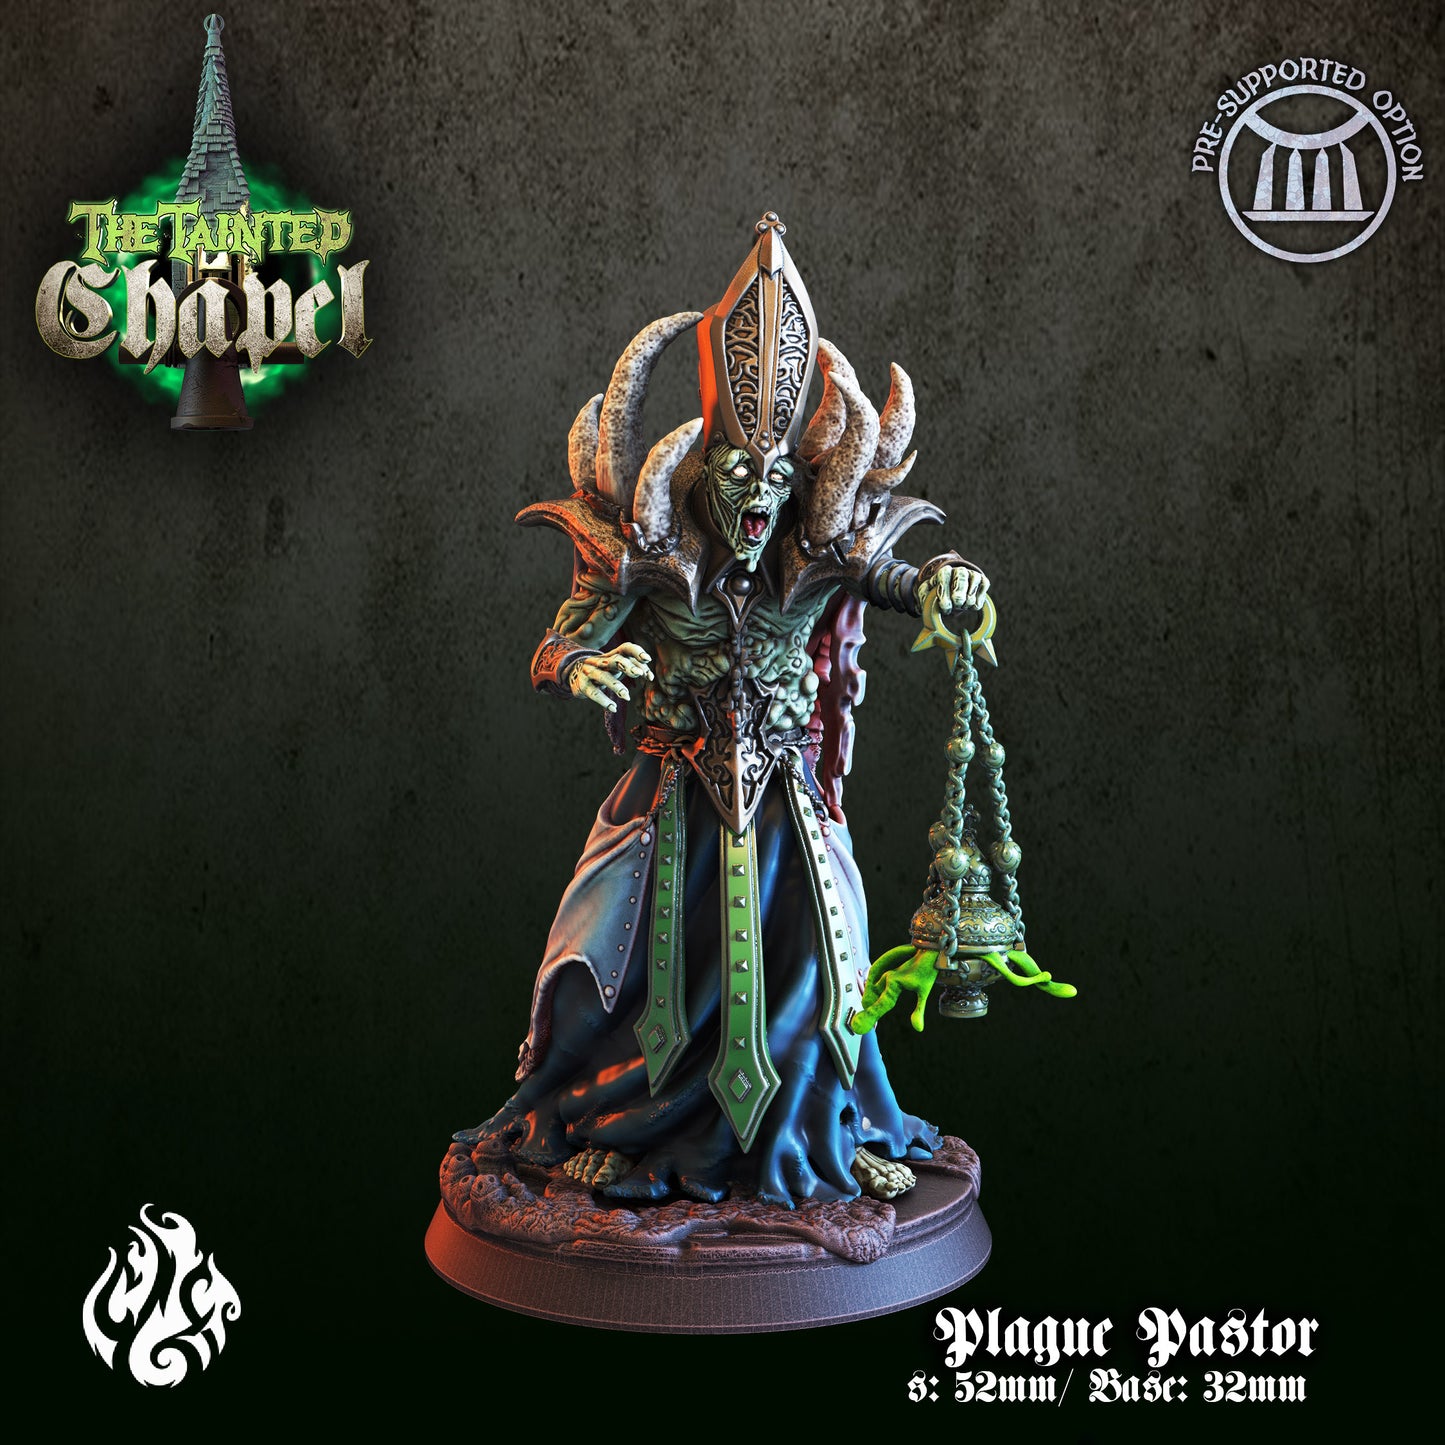 The Plague Pastor - The Tainted Chapel Series from Crippled God Foundry - Table-top gaming mini and collectable for painting.